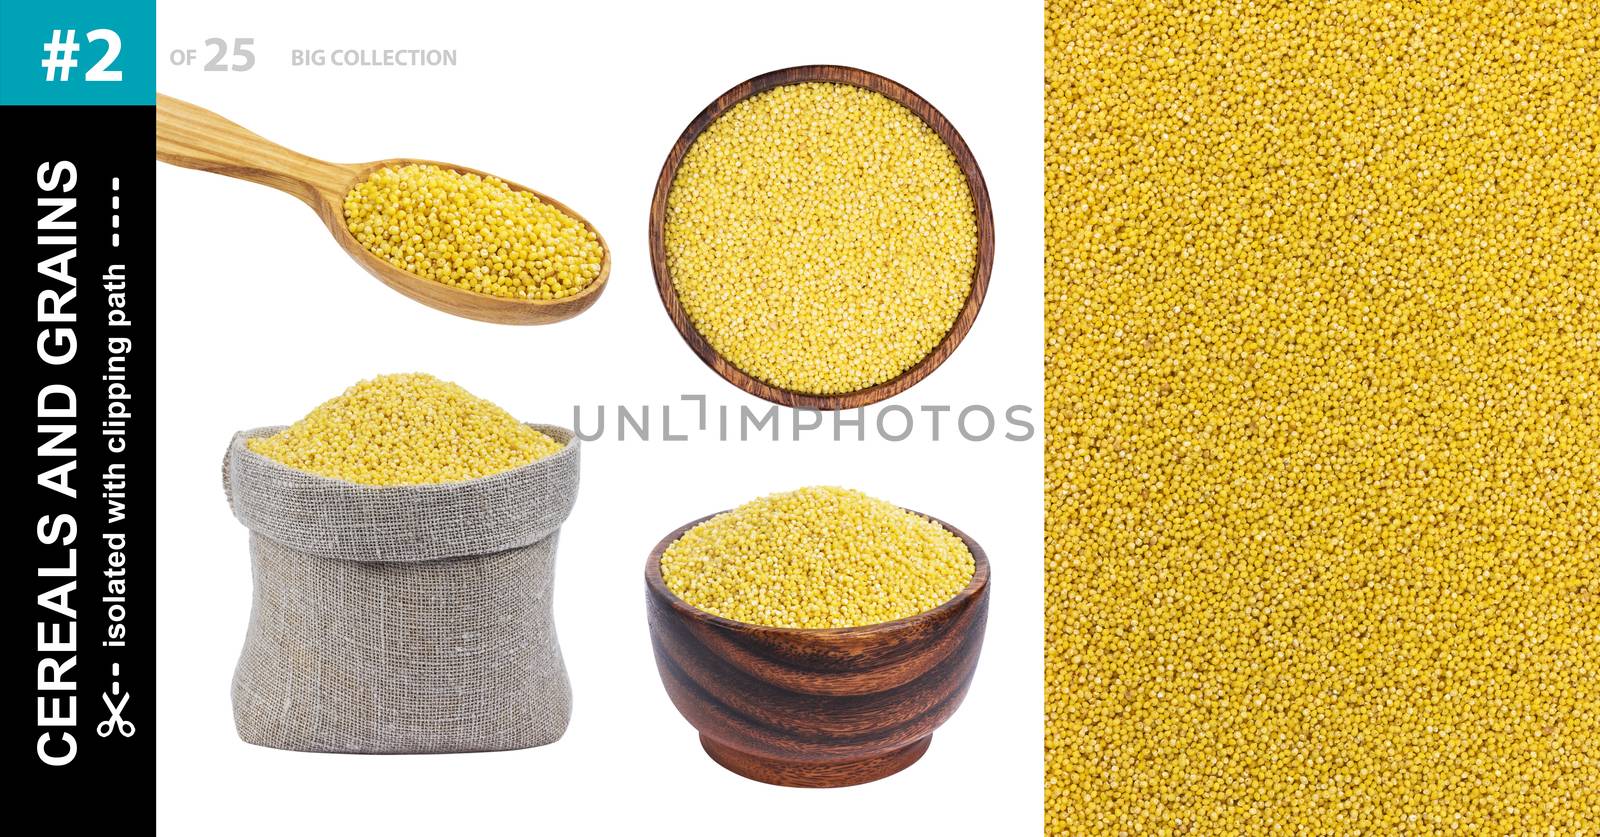 Millet seeds in different dishware isolated on white background, collection by xamtiw